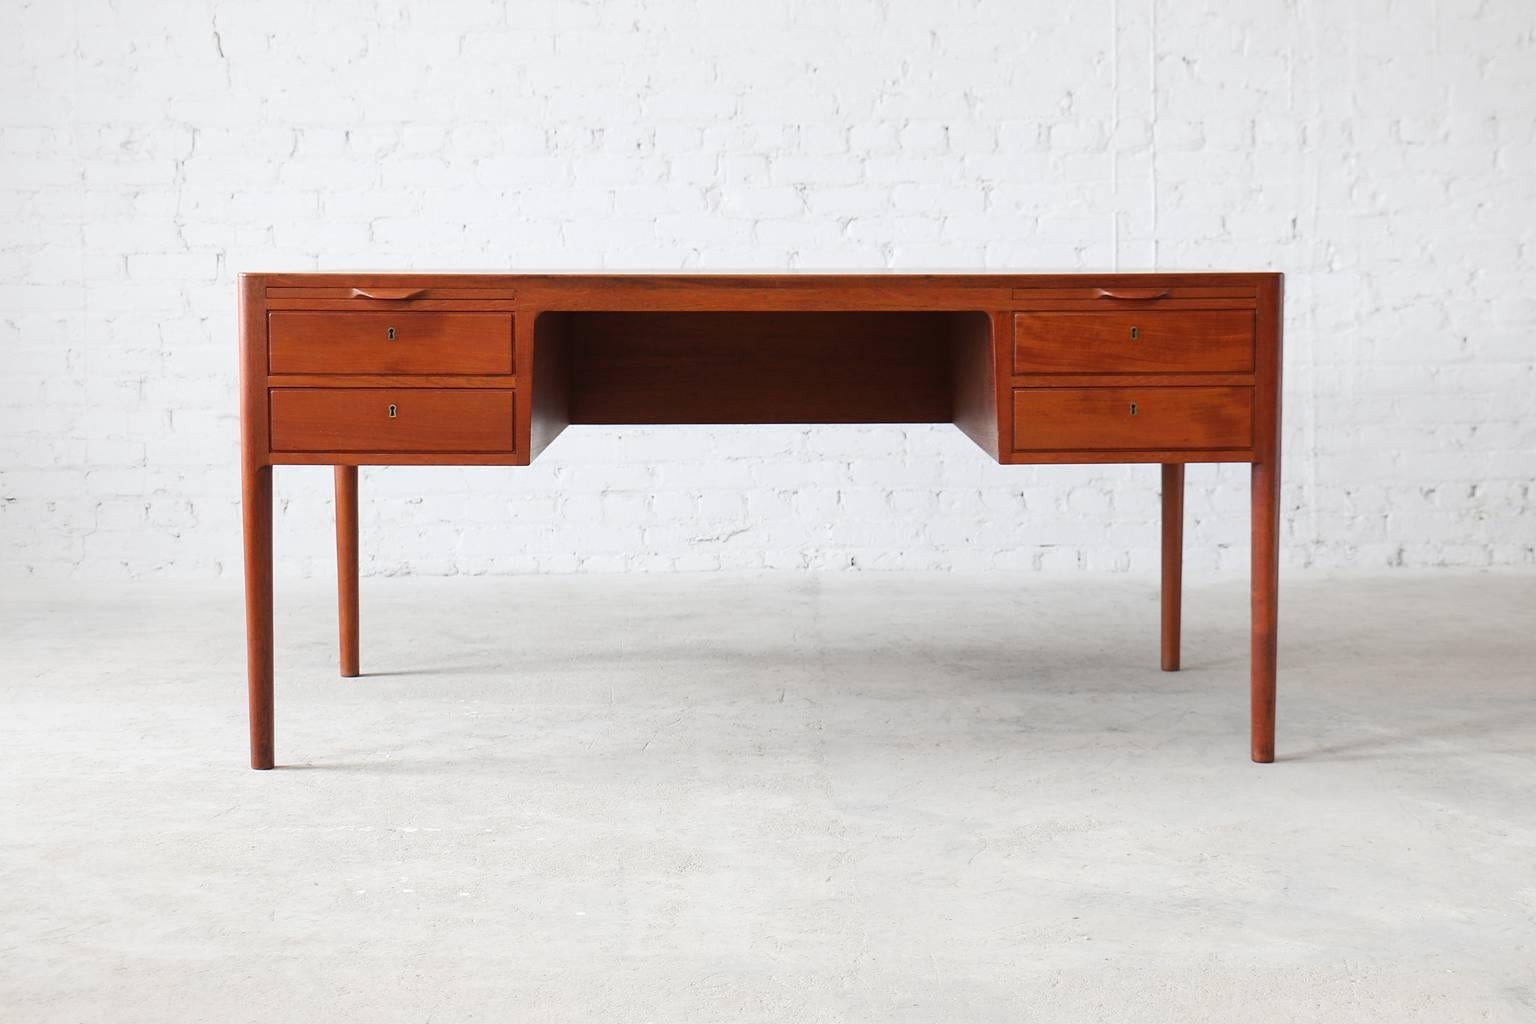 - solid teak frame and banding
- seldom seen design
- 4 locking drawers and two pull-out writing surfaces

A seldom seen teak desk by Hans Wegner for Johannes Hansen. This example has four locking drawers and two pull out writing surfaces which